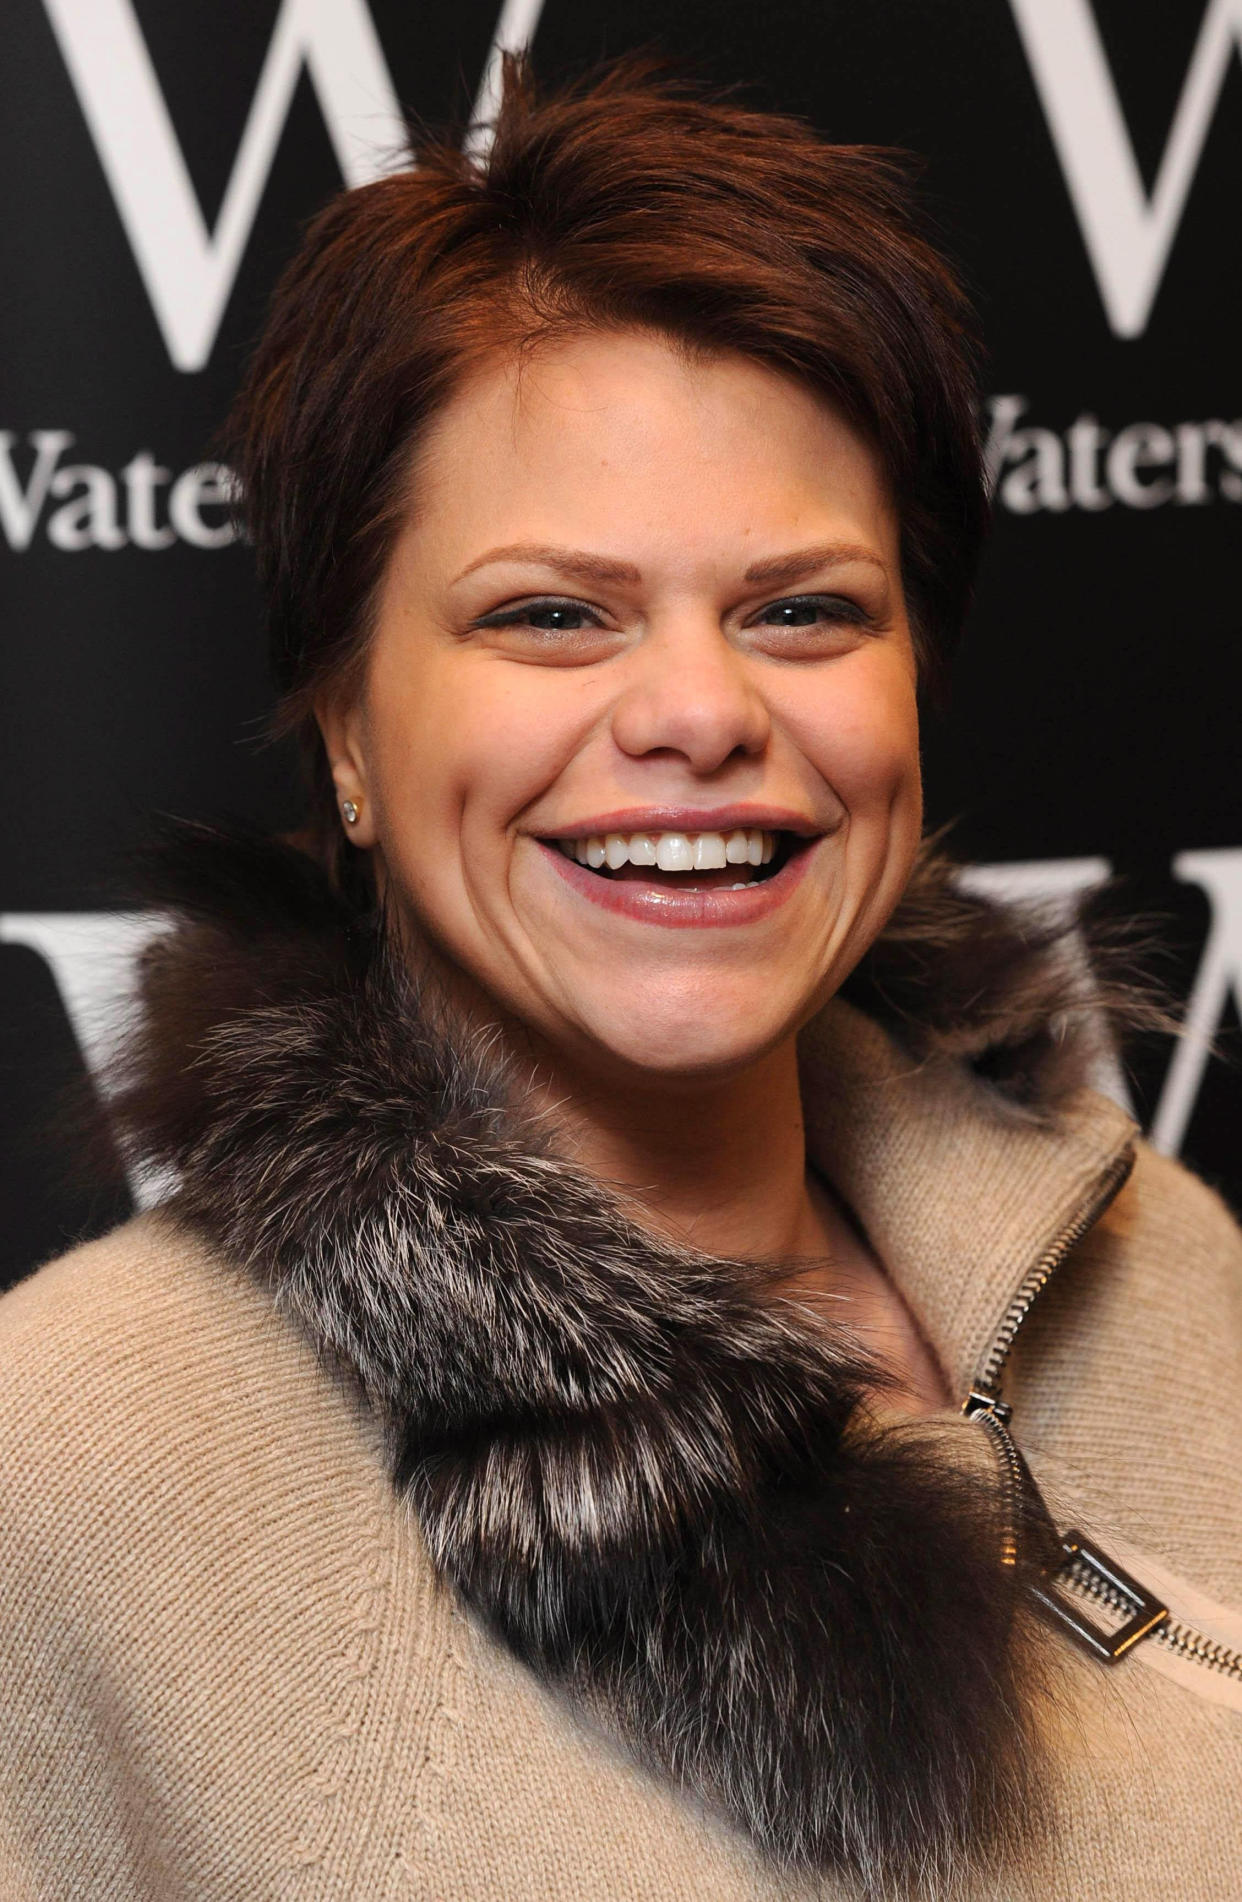 Jade Goody signs copies of her autobiography 'Catch A Falling Star', at Waterstones, Lakeside Shopping Centre, Thurrock.